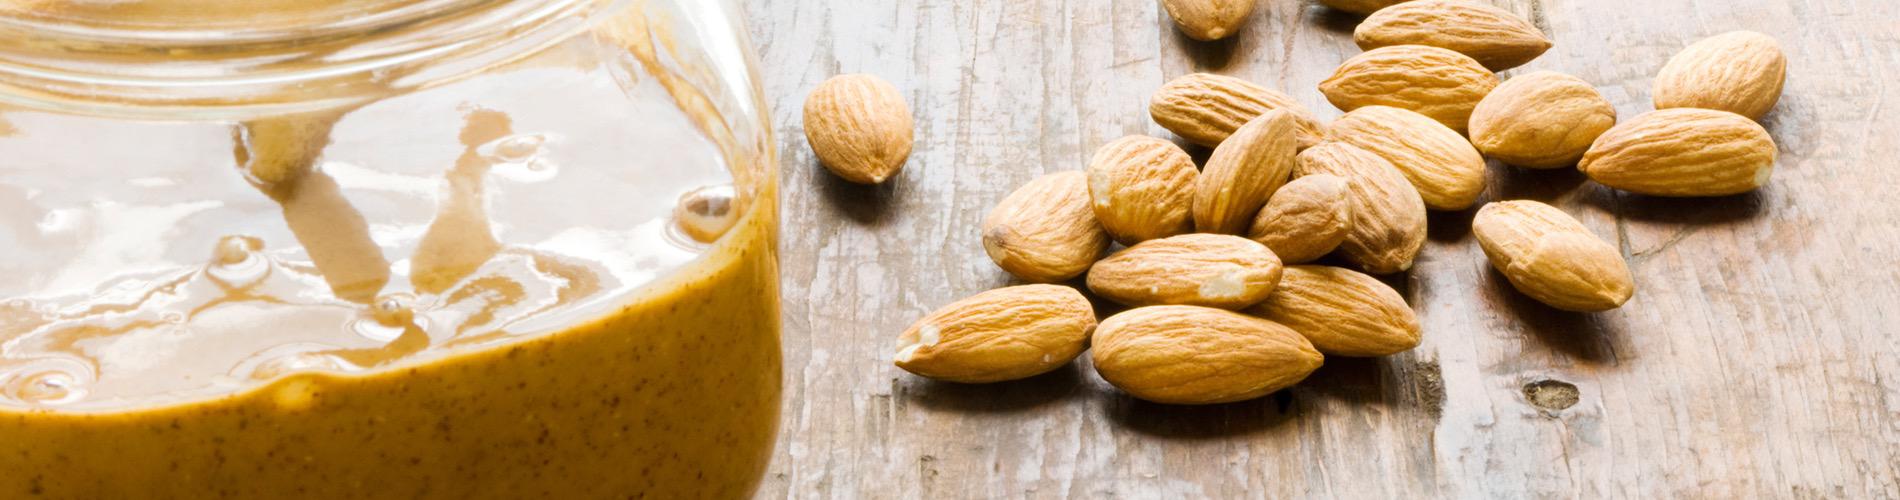 FDA Fails to Recall Tainted Peanut Butter